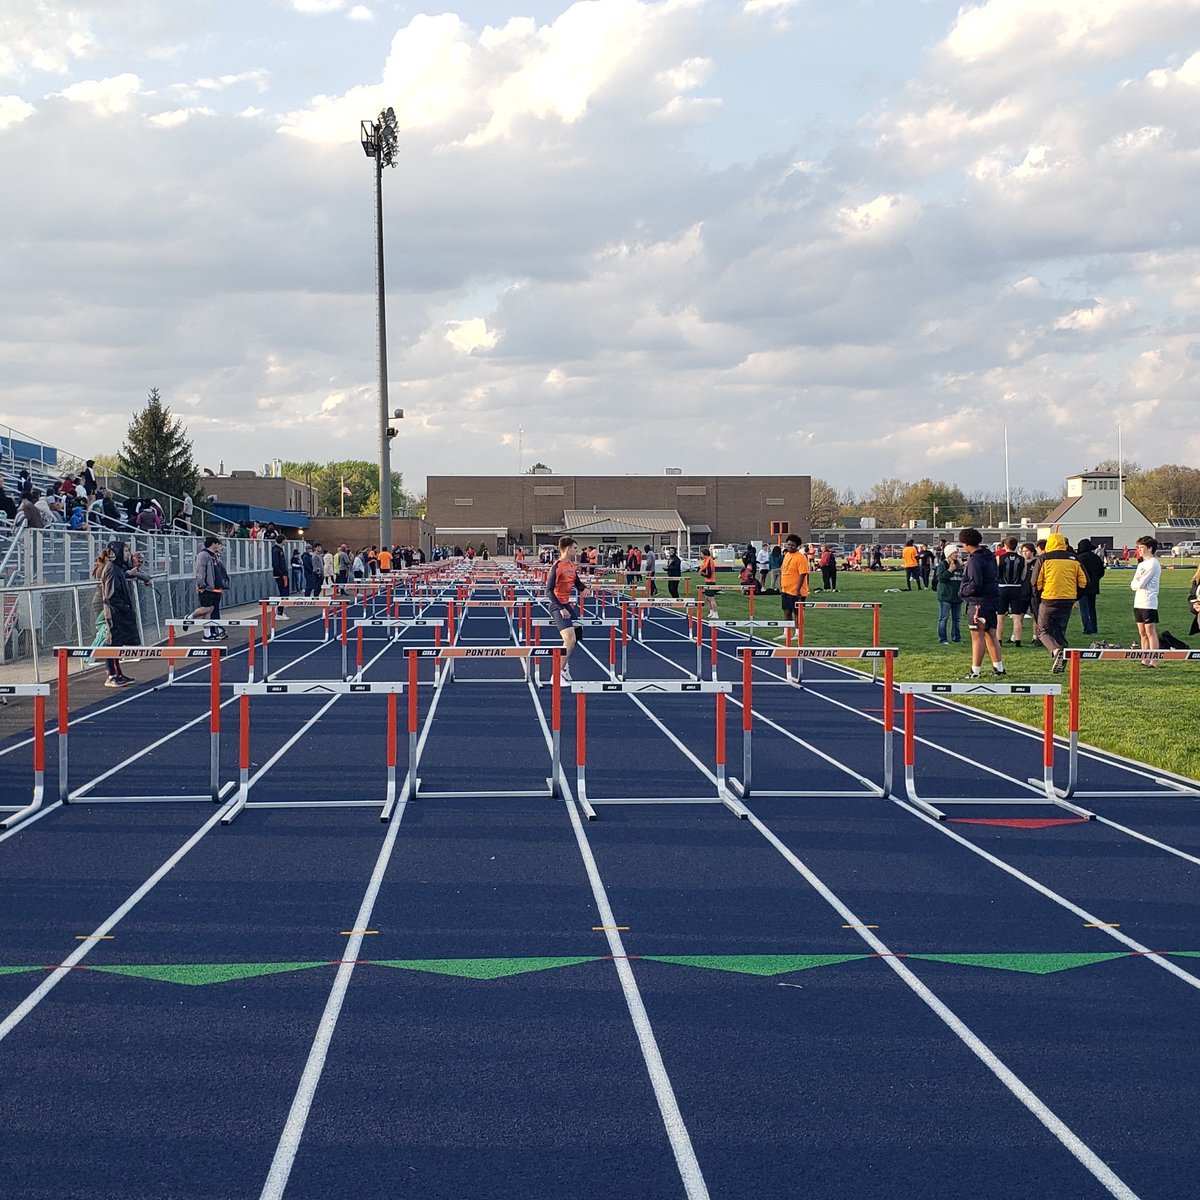 PTHS PONTIAC TRACK is hosting the 
IPC TRACK CONFERENCE CHAMPIONSHIPS
Boys & Girls on Wednesday April 30. 
Field Events start @ 12 NOON
Running Eventa start @ 2
Please come out and support our programs! Our Conference is legit! You will see some amazing athletes compete!